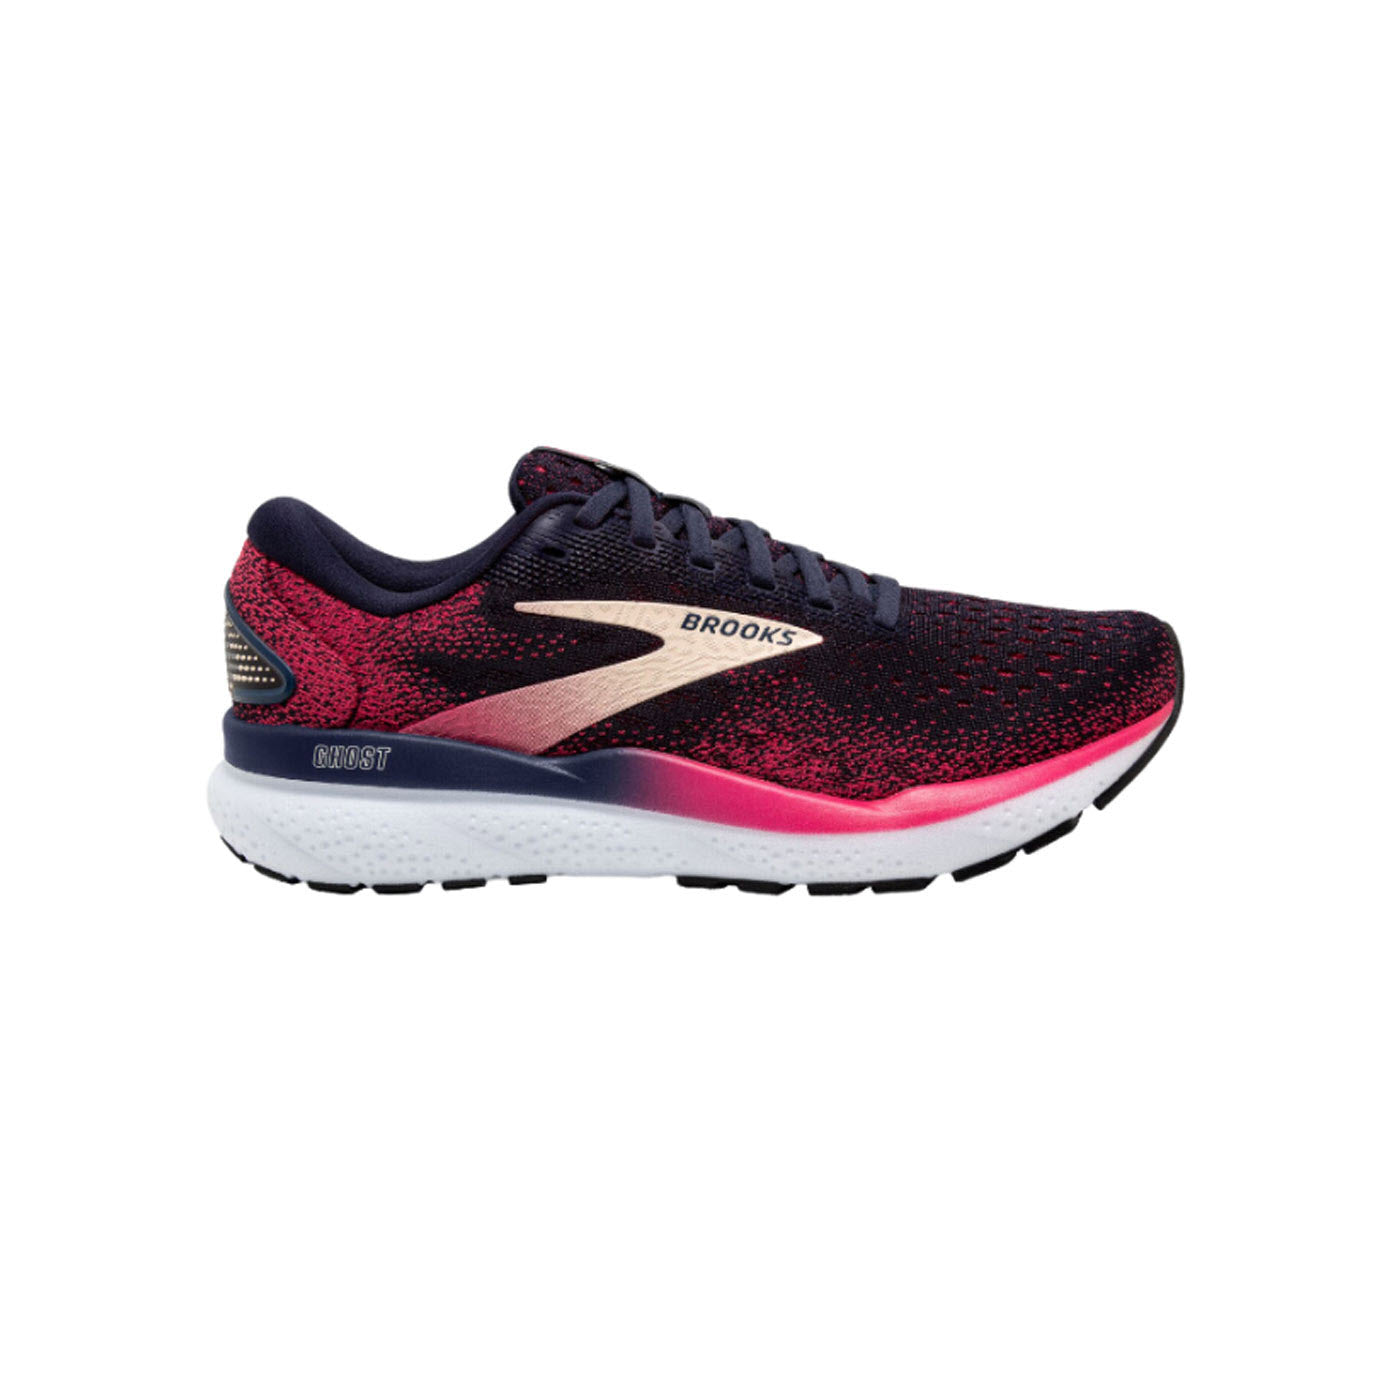 A single black and pink BROOKS GHOST 16 PEACOAT/RASPBERRY/APRICOT - WOMENS athletic running shoe with a white and black sole, featuring a "Brooks" logo on the side.